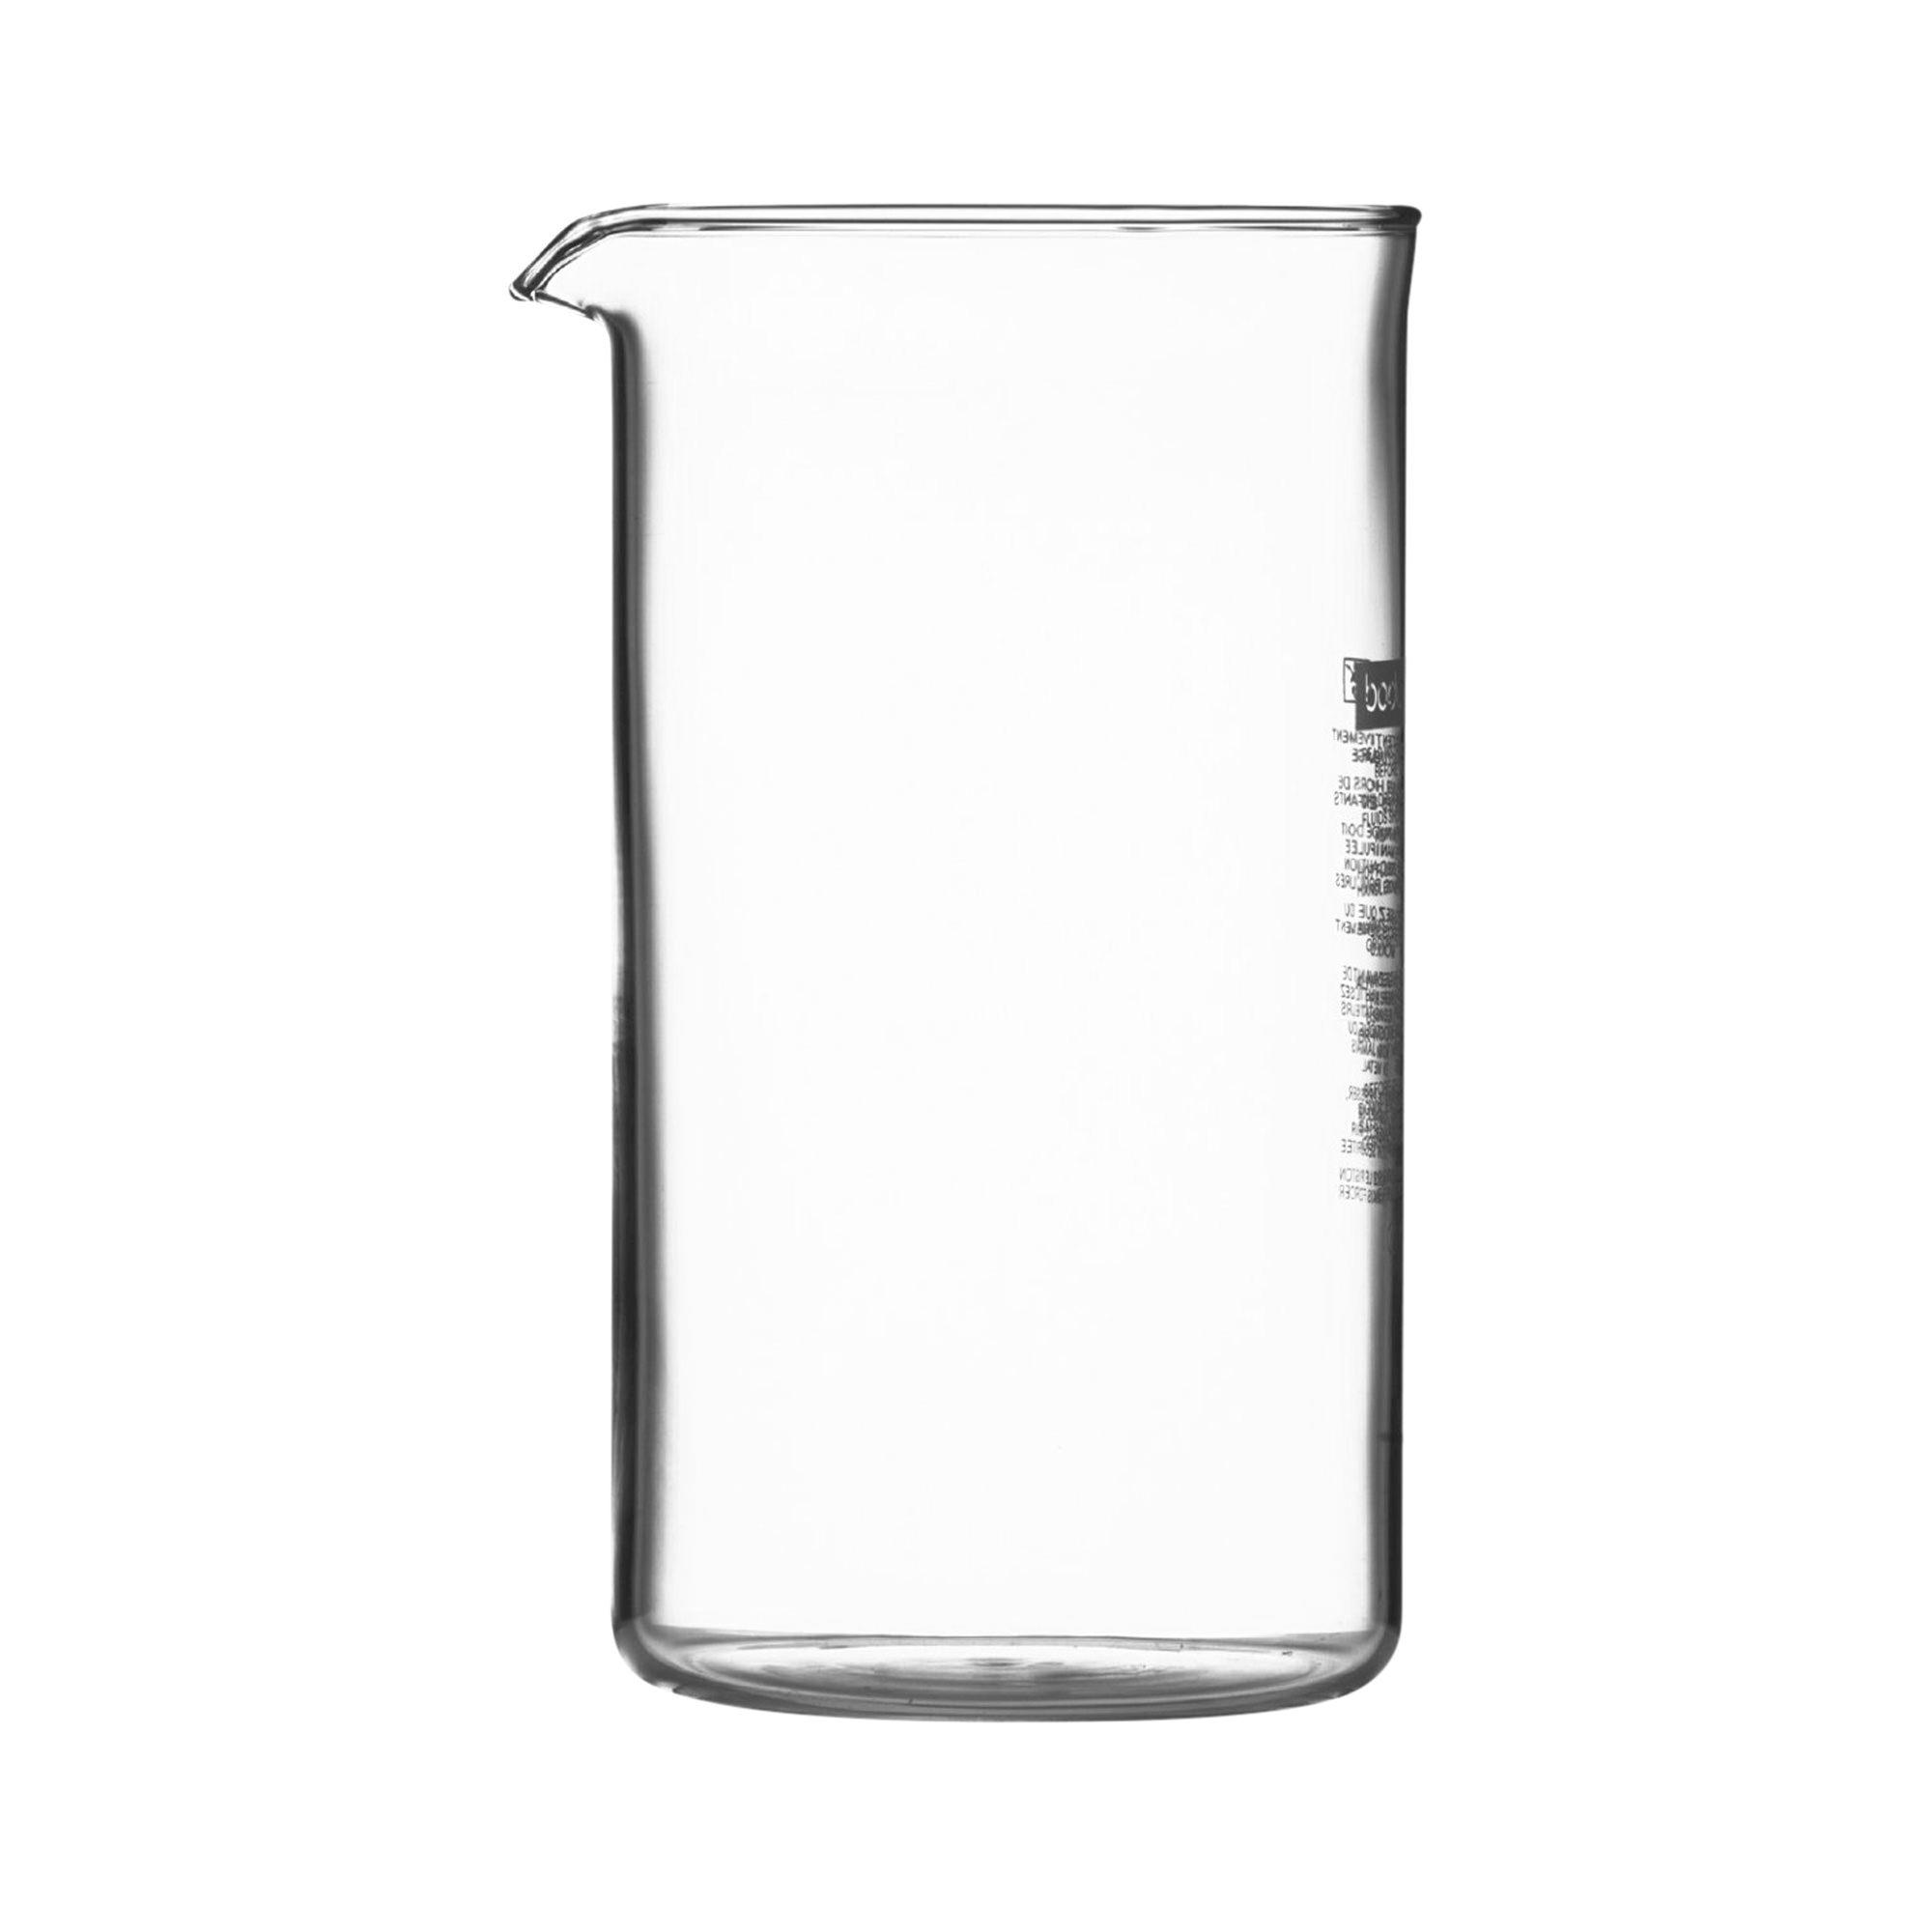 Bodum Spare Glass for Chambord Coffee Maker 8 Cup Image 1